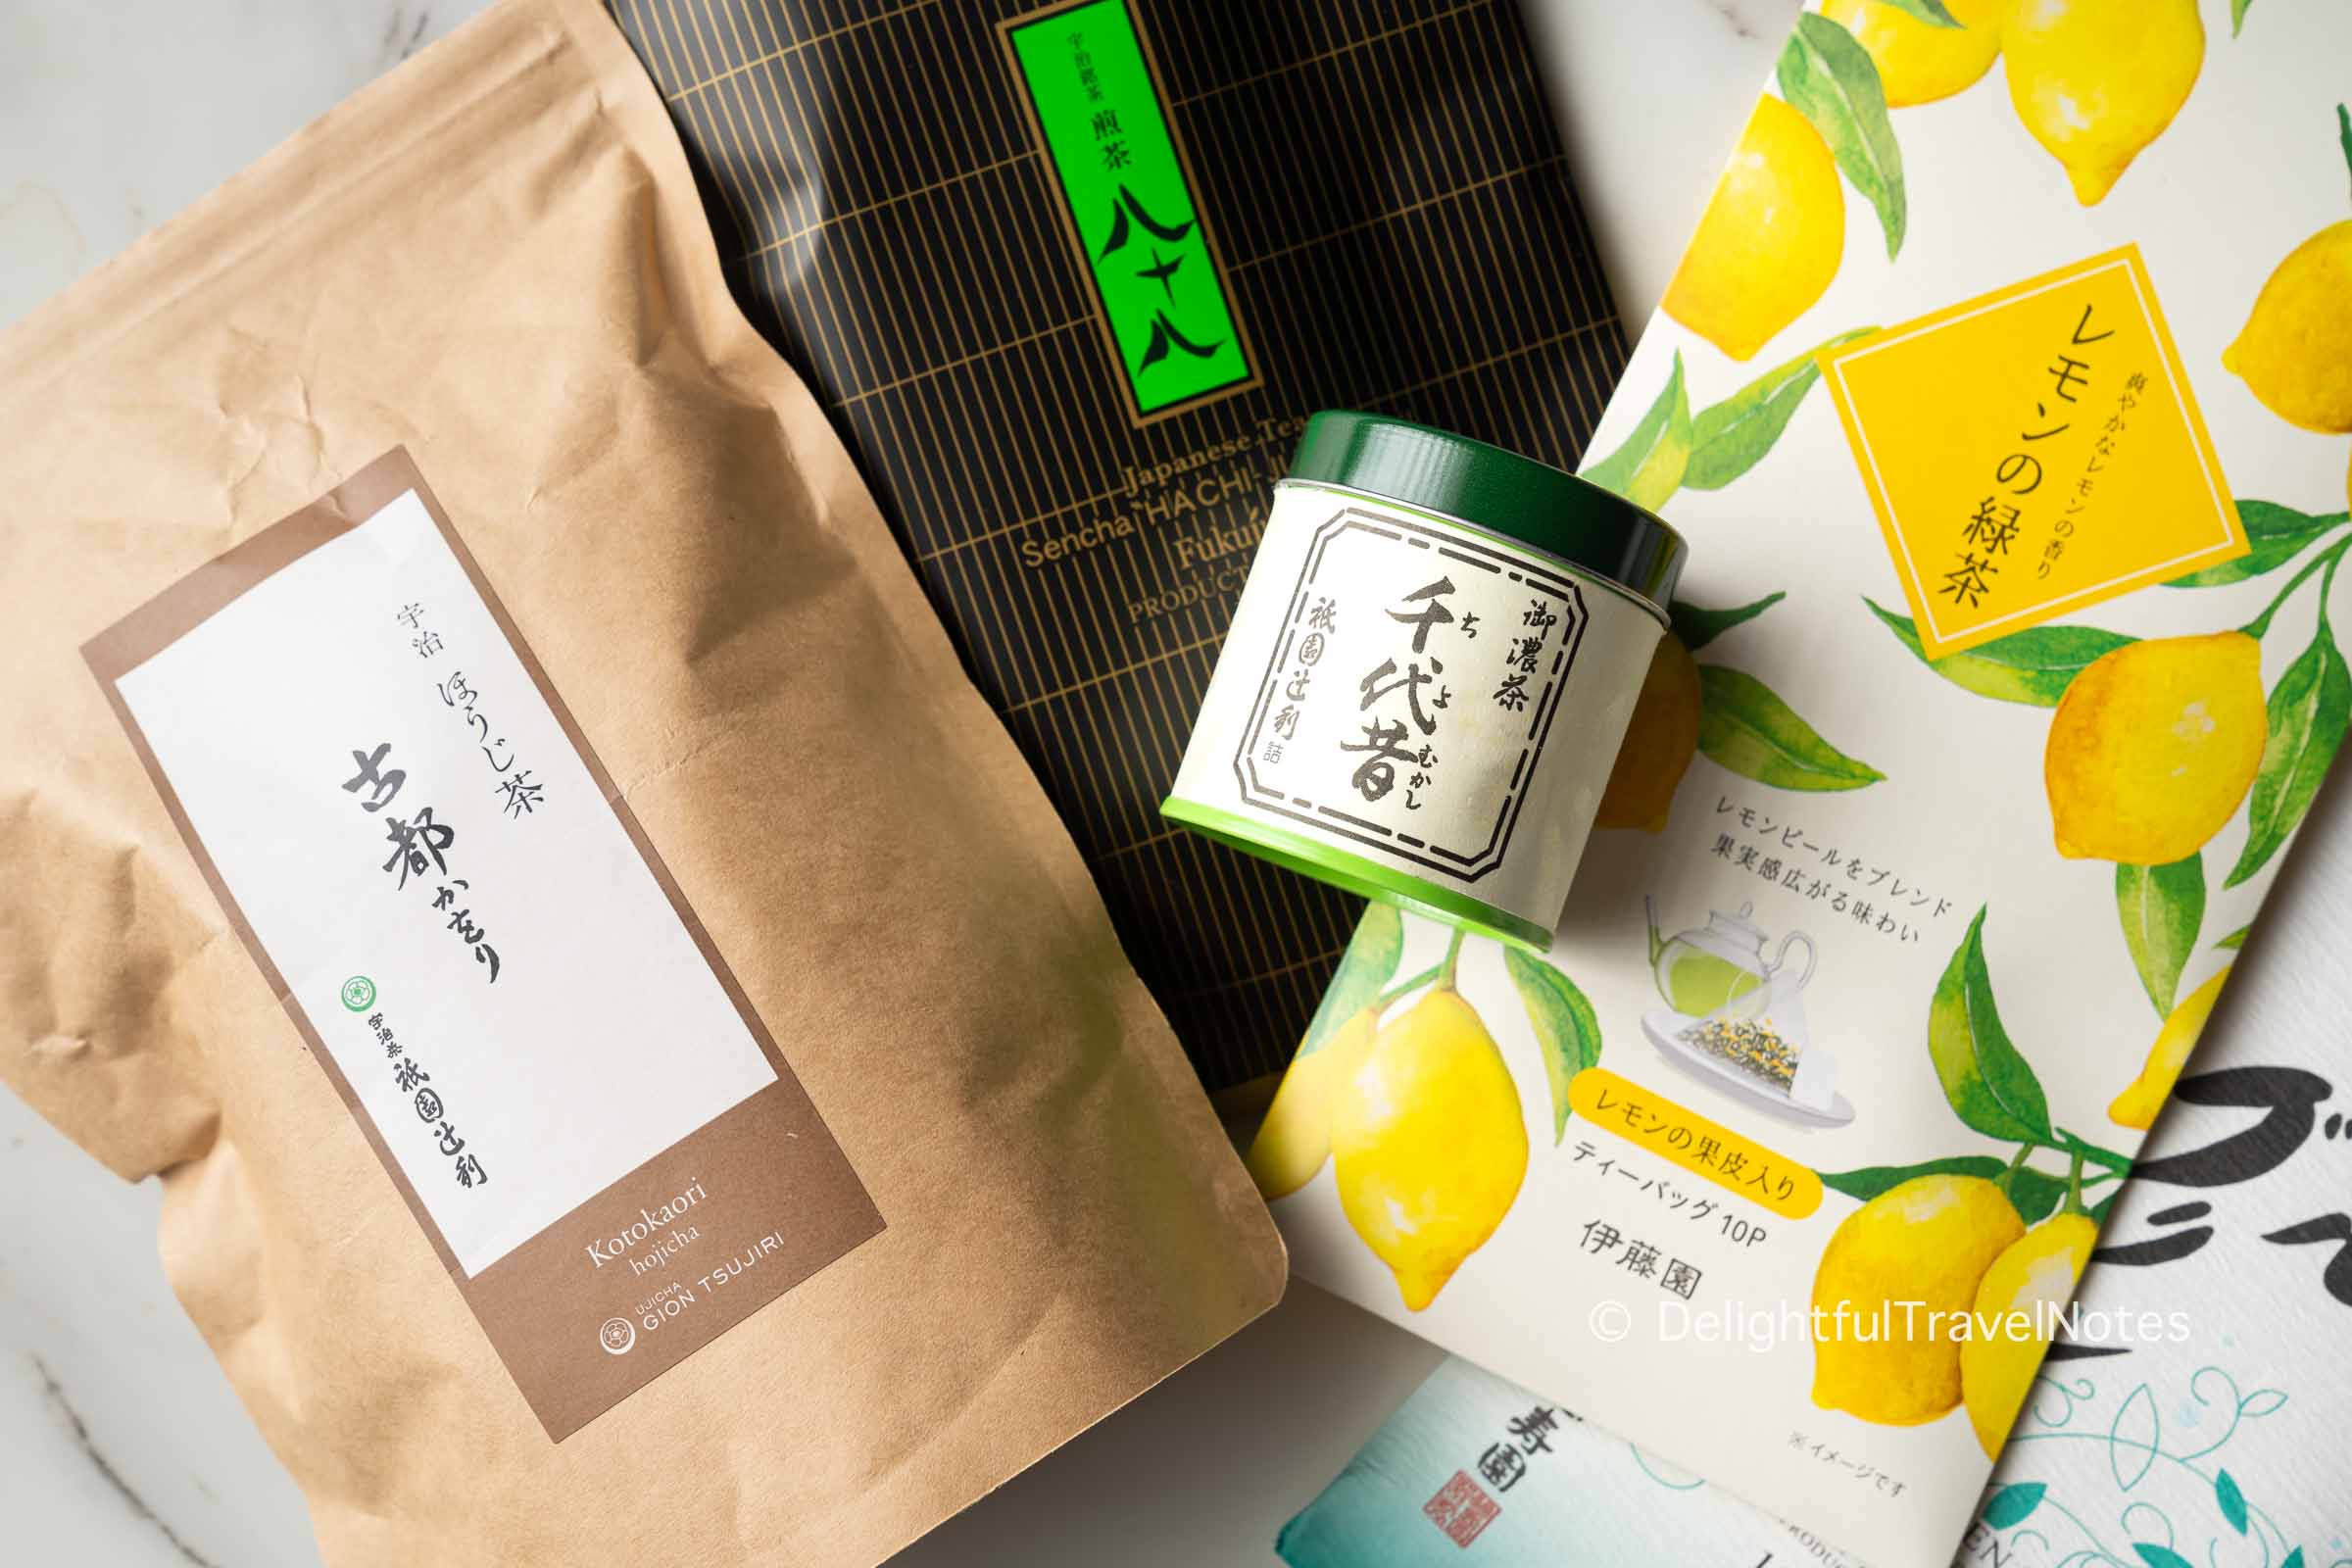 A selection of Japanese tea, an excellent souvenir from Japan.